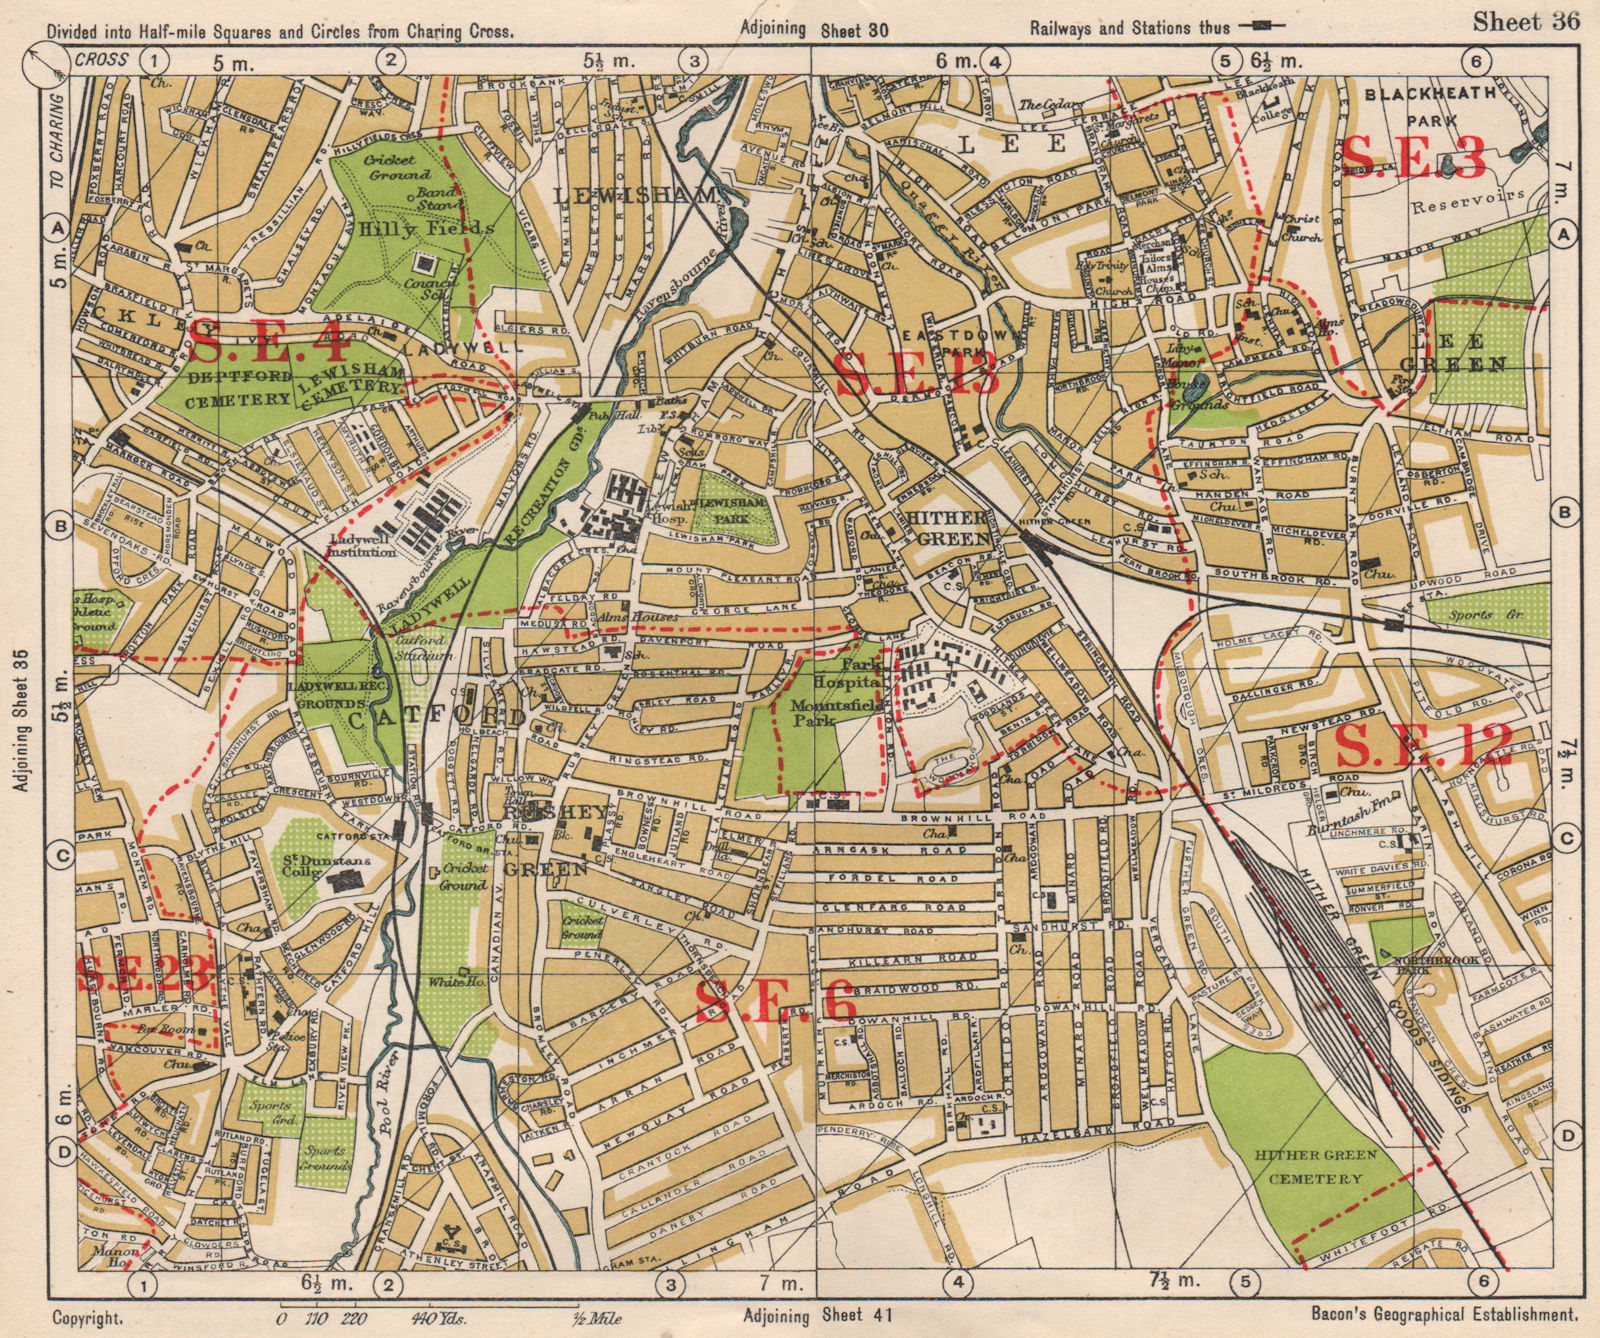 SE LONDON. Catford Hither/Rushey/Lee Green Lewisham Ladywell. BACON 1933 map